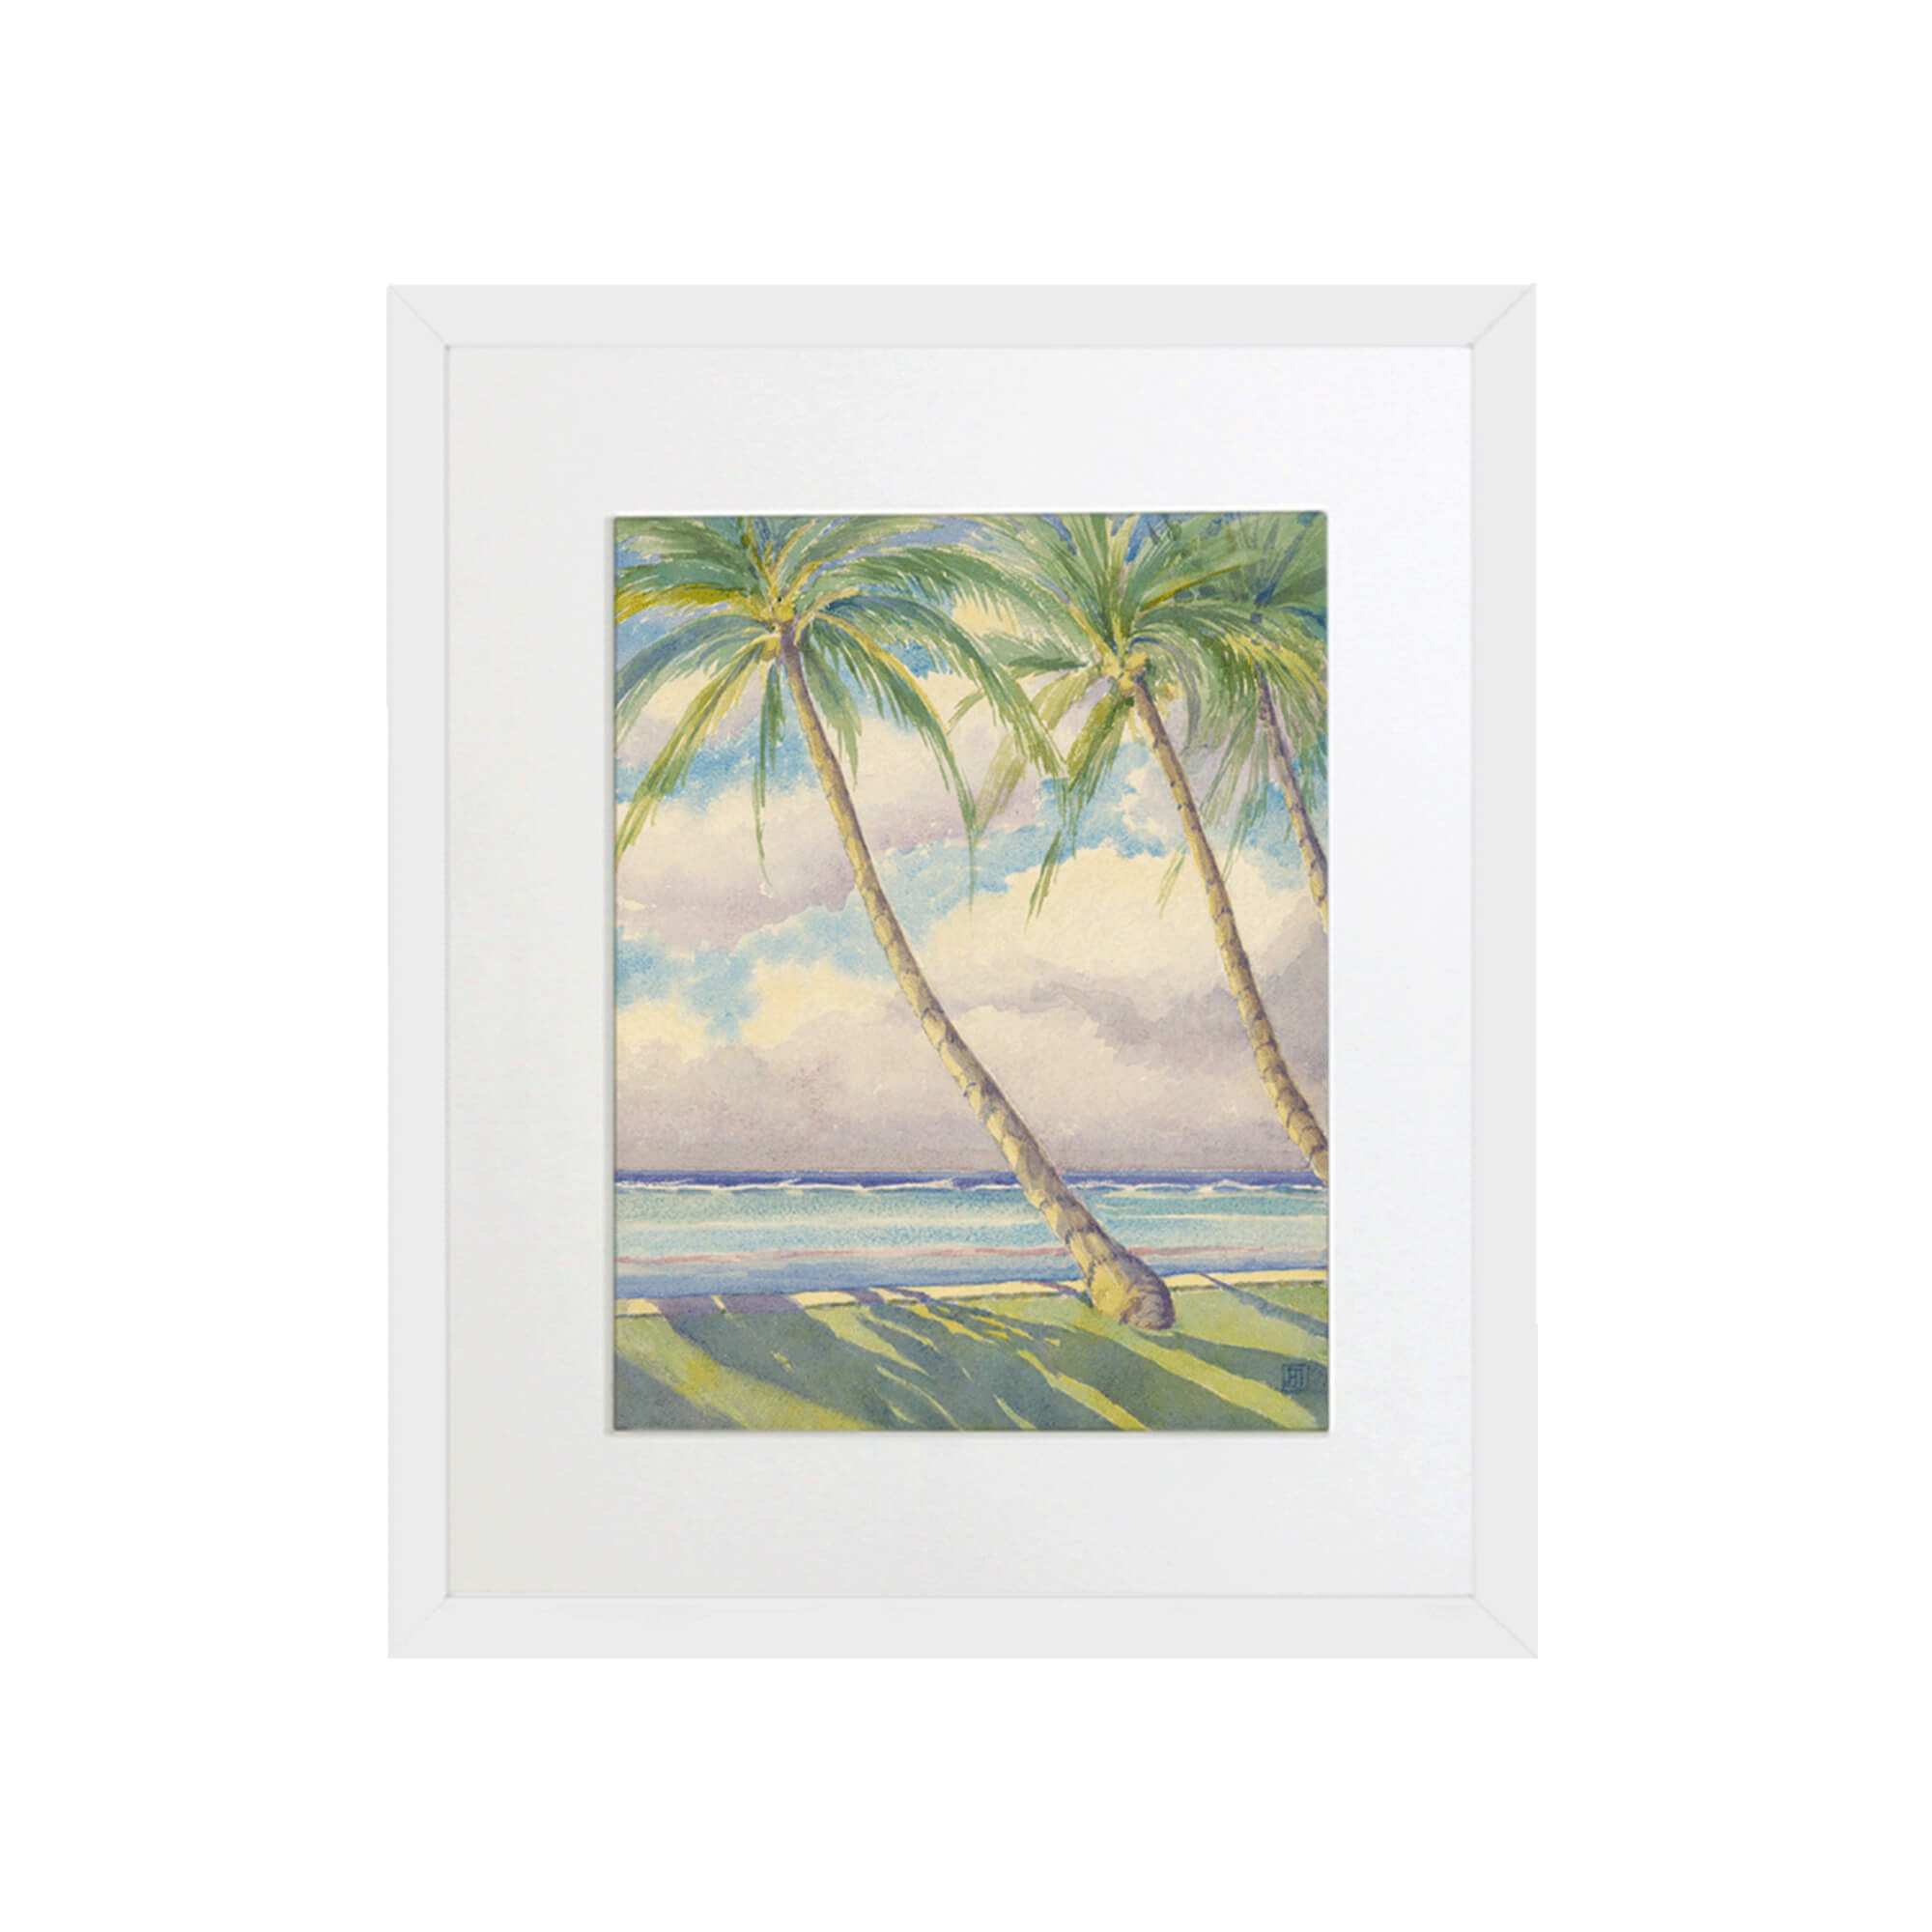 Coconut trees framing a beach view